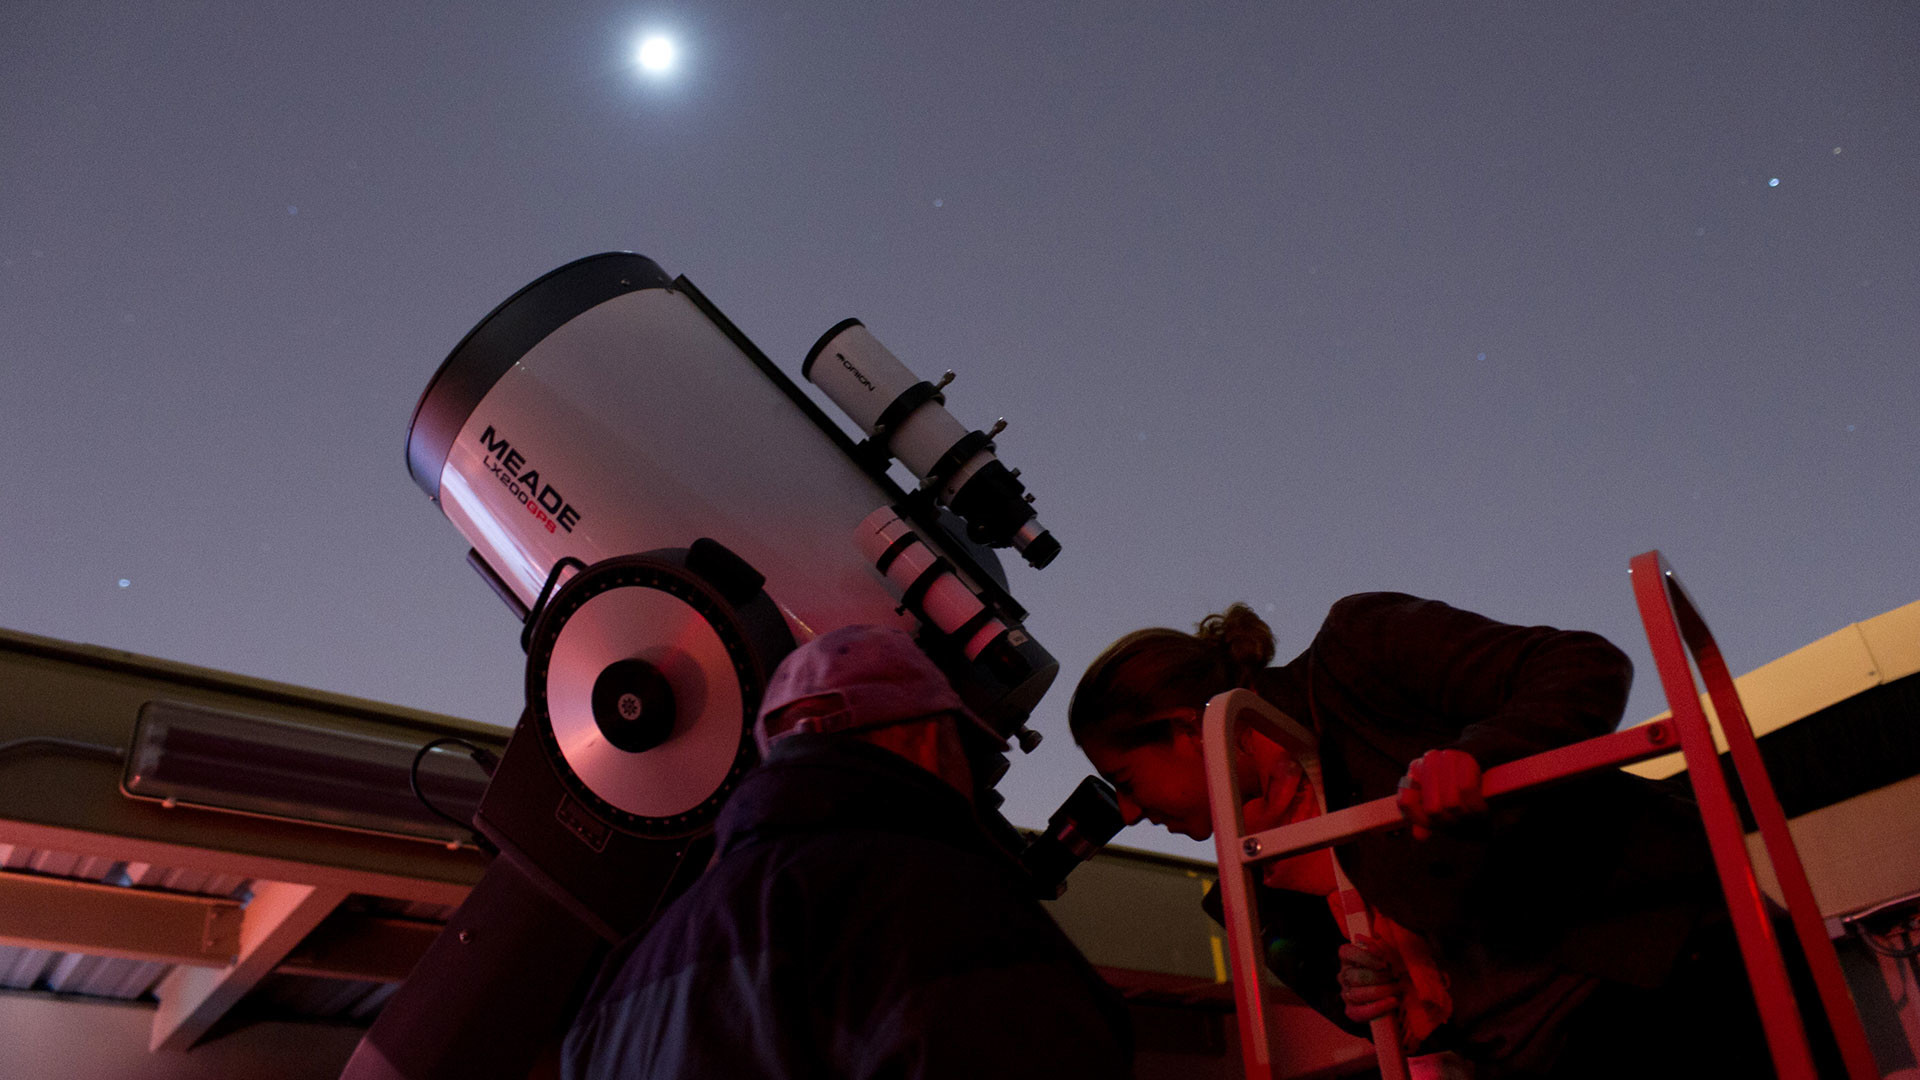 1920x1080 photo - Meade telescope at dusk in the Georgia Tech observatory